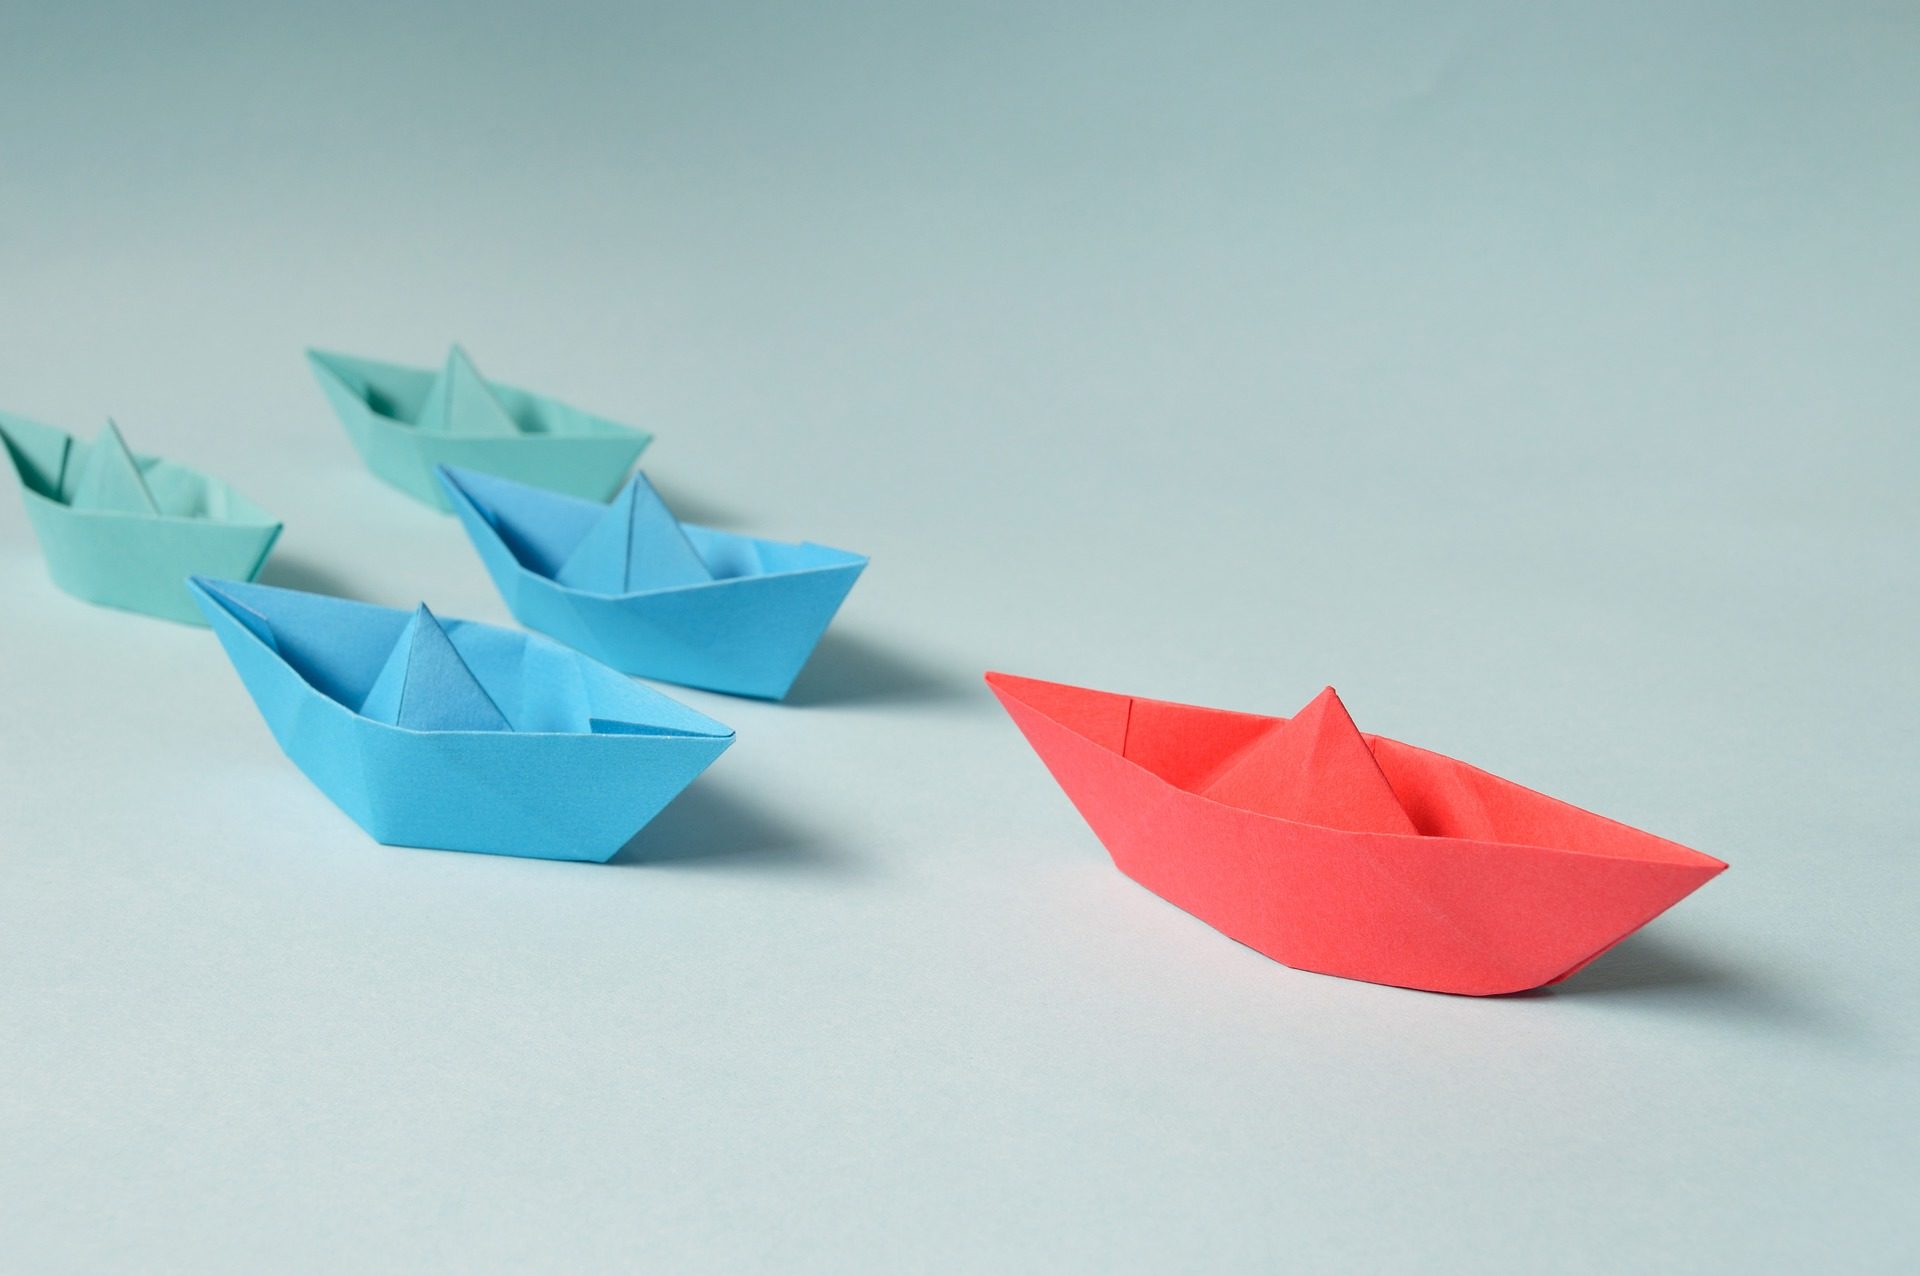 A red origami boat leads several blue boats across the photo